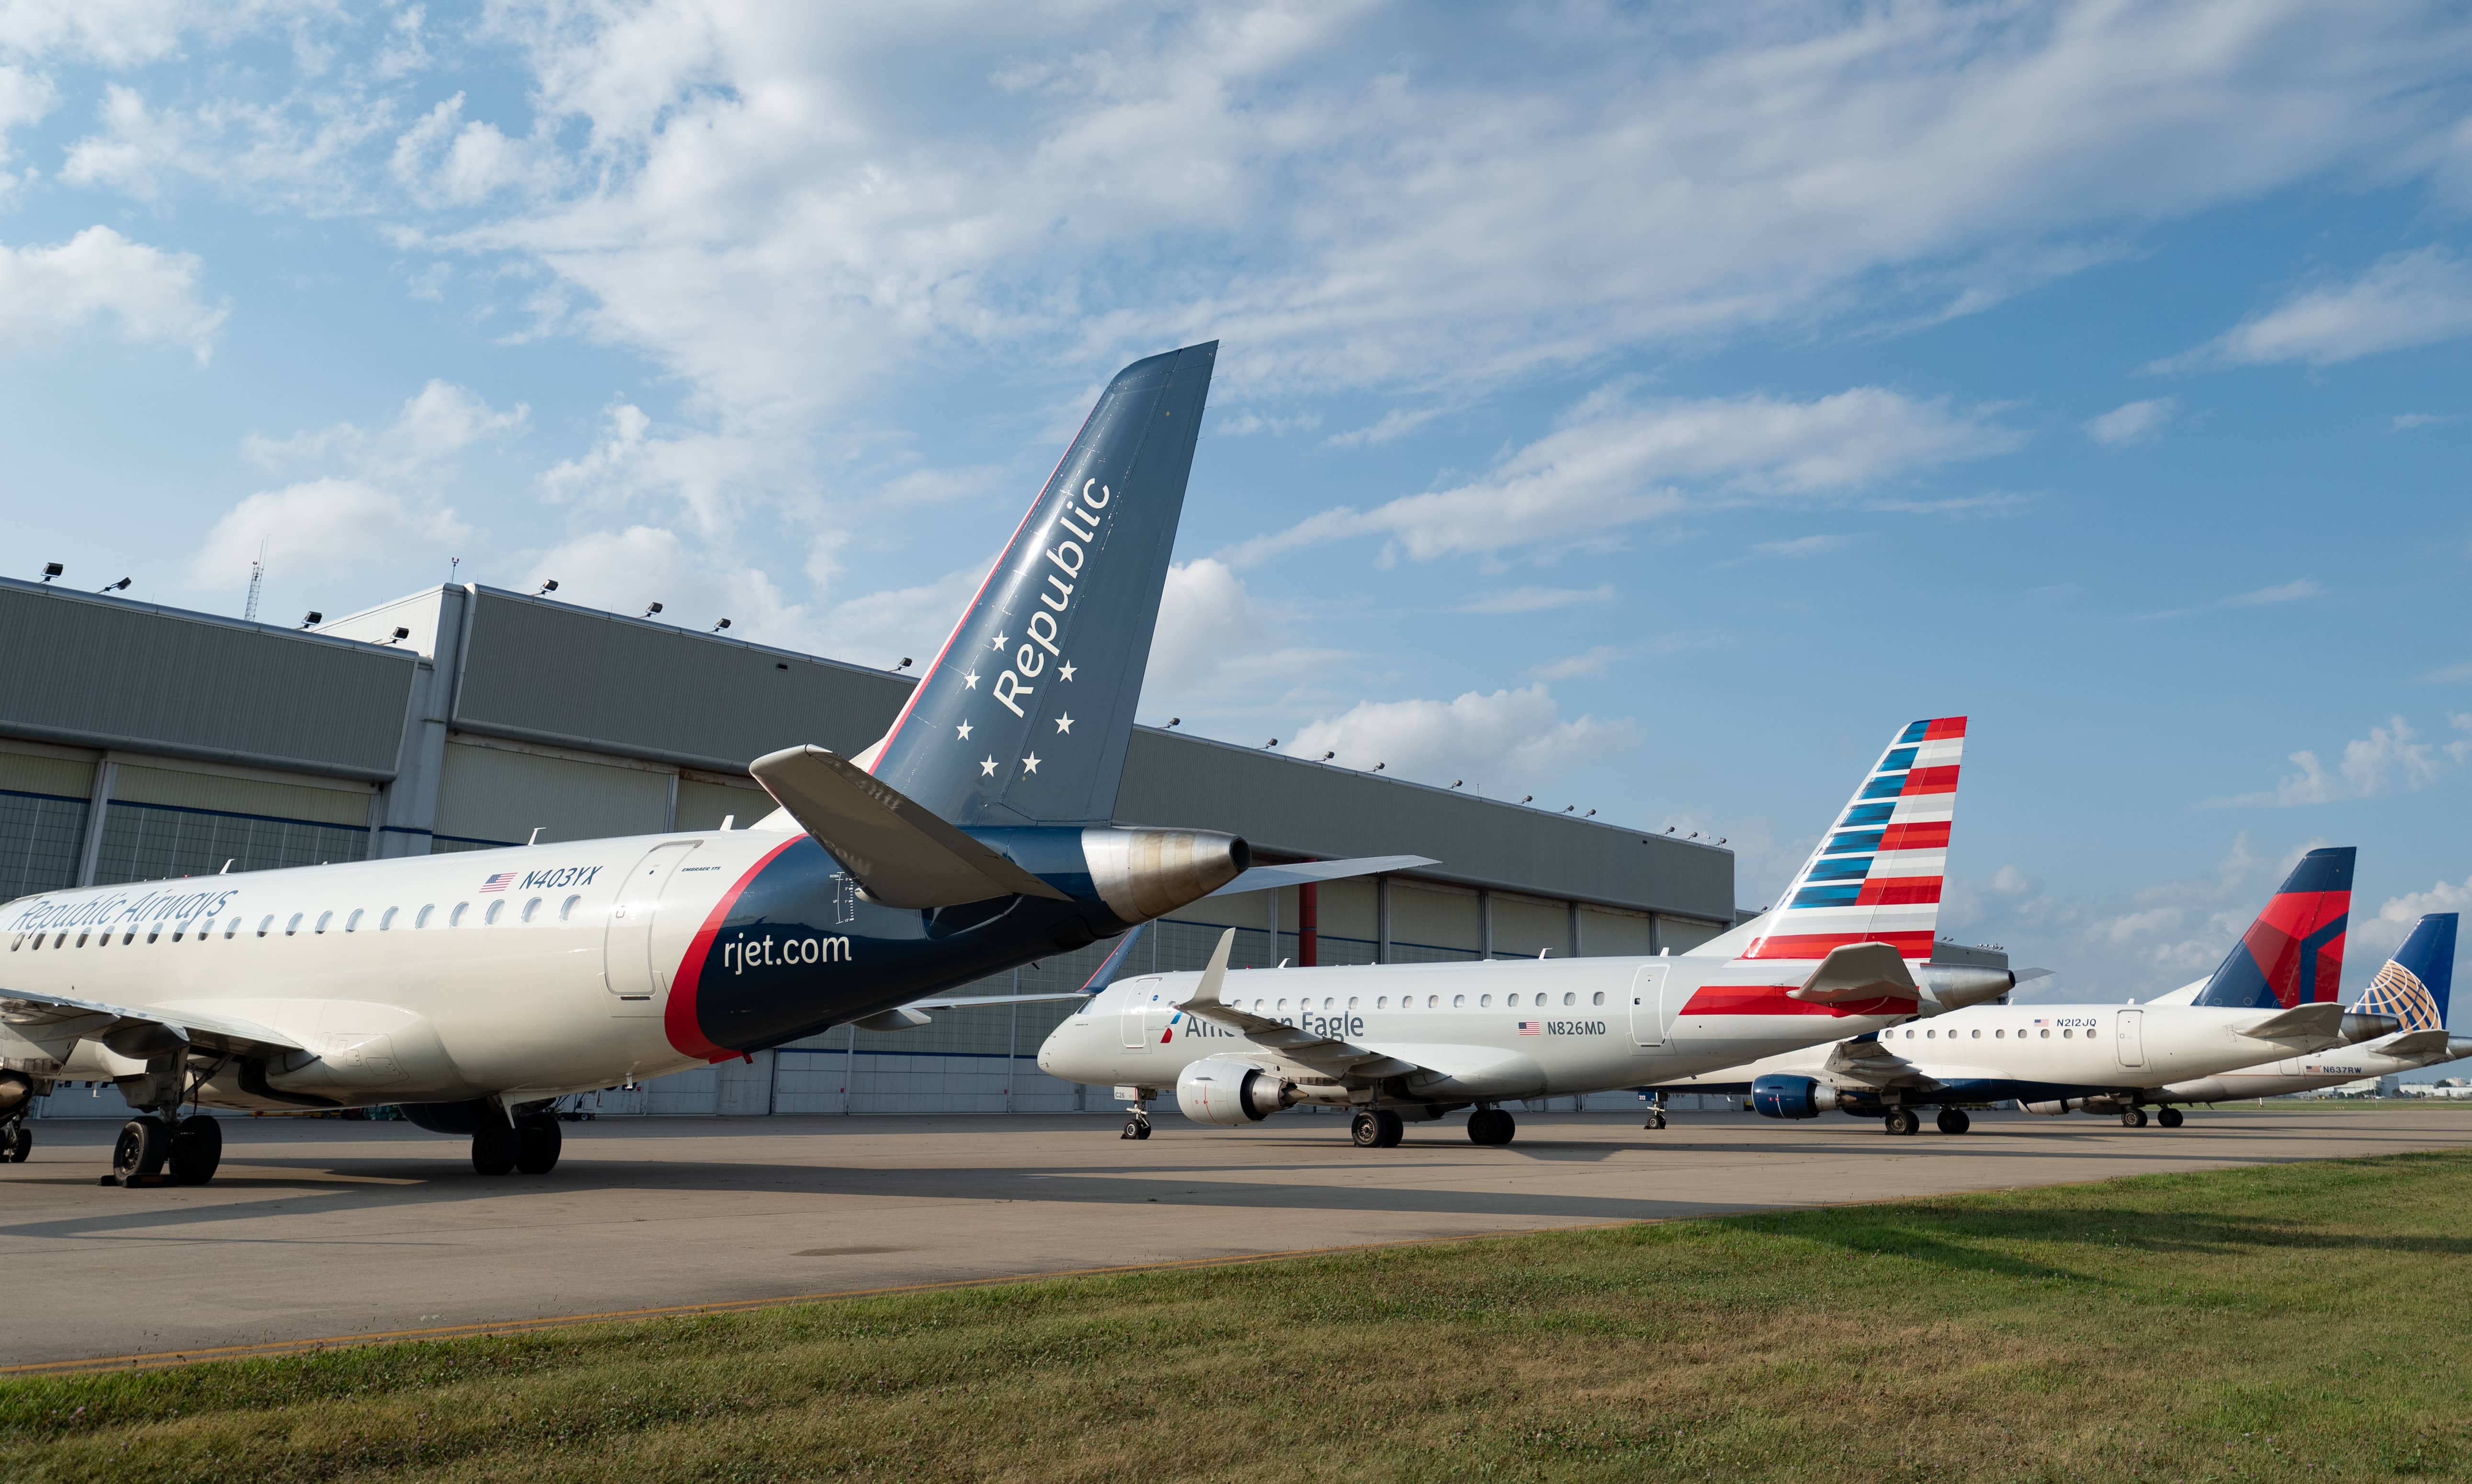 EmbraerX signs deal with US-based Republic Airways for use of Beacon maintenance platform